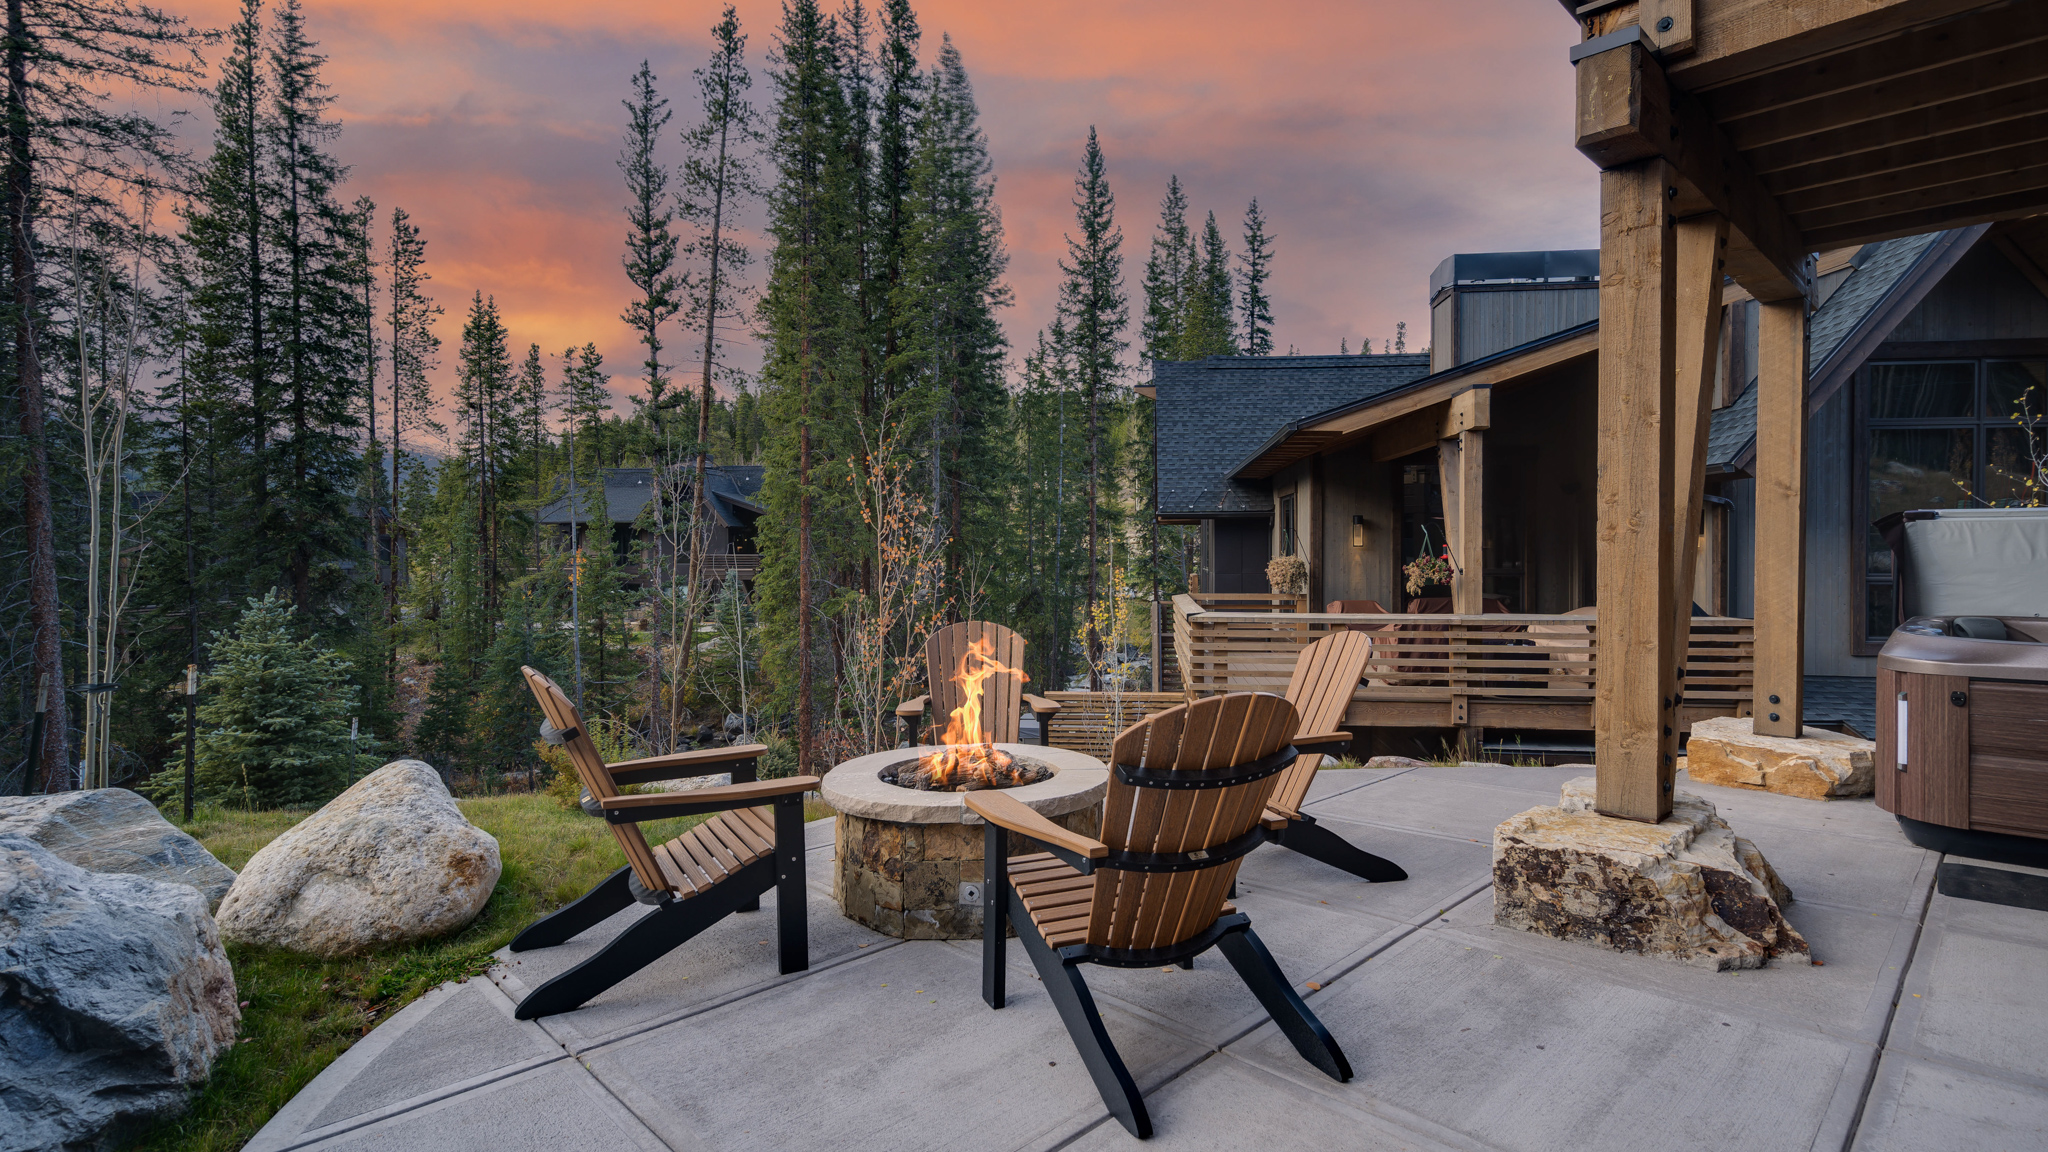 Enjoy the firepit at dusk on the lower patio